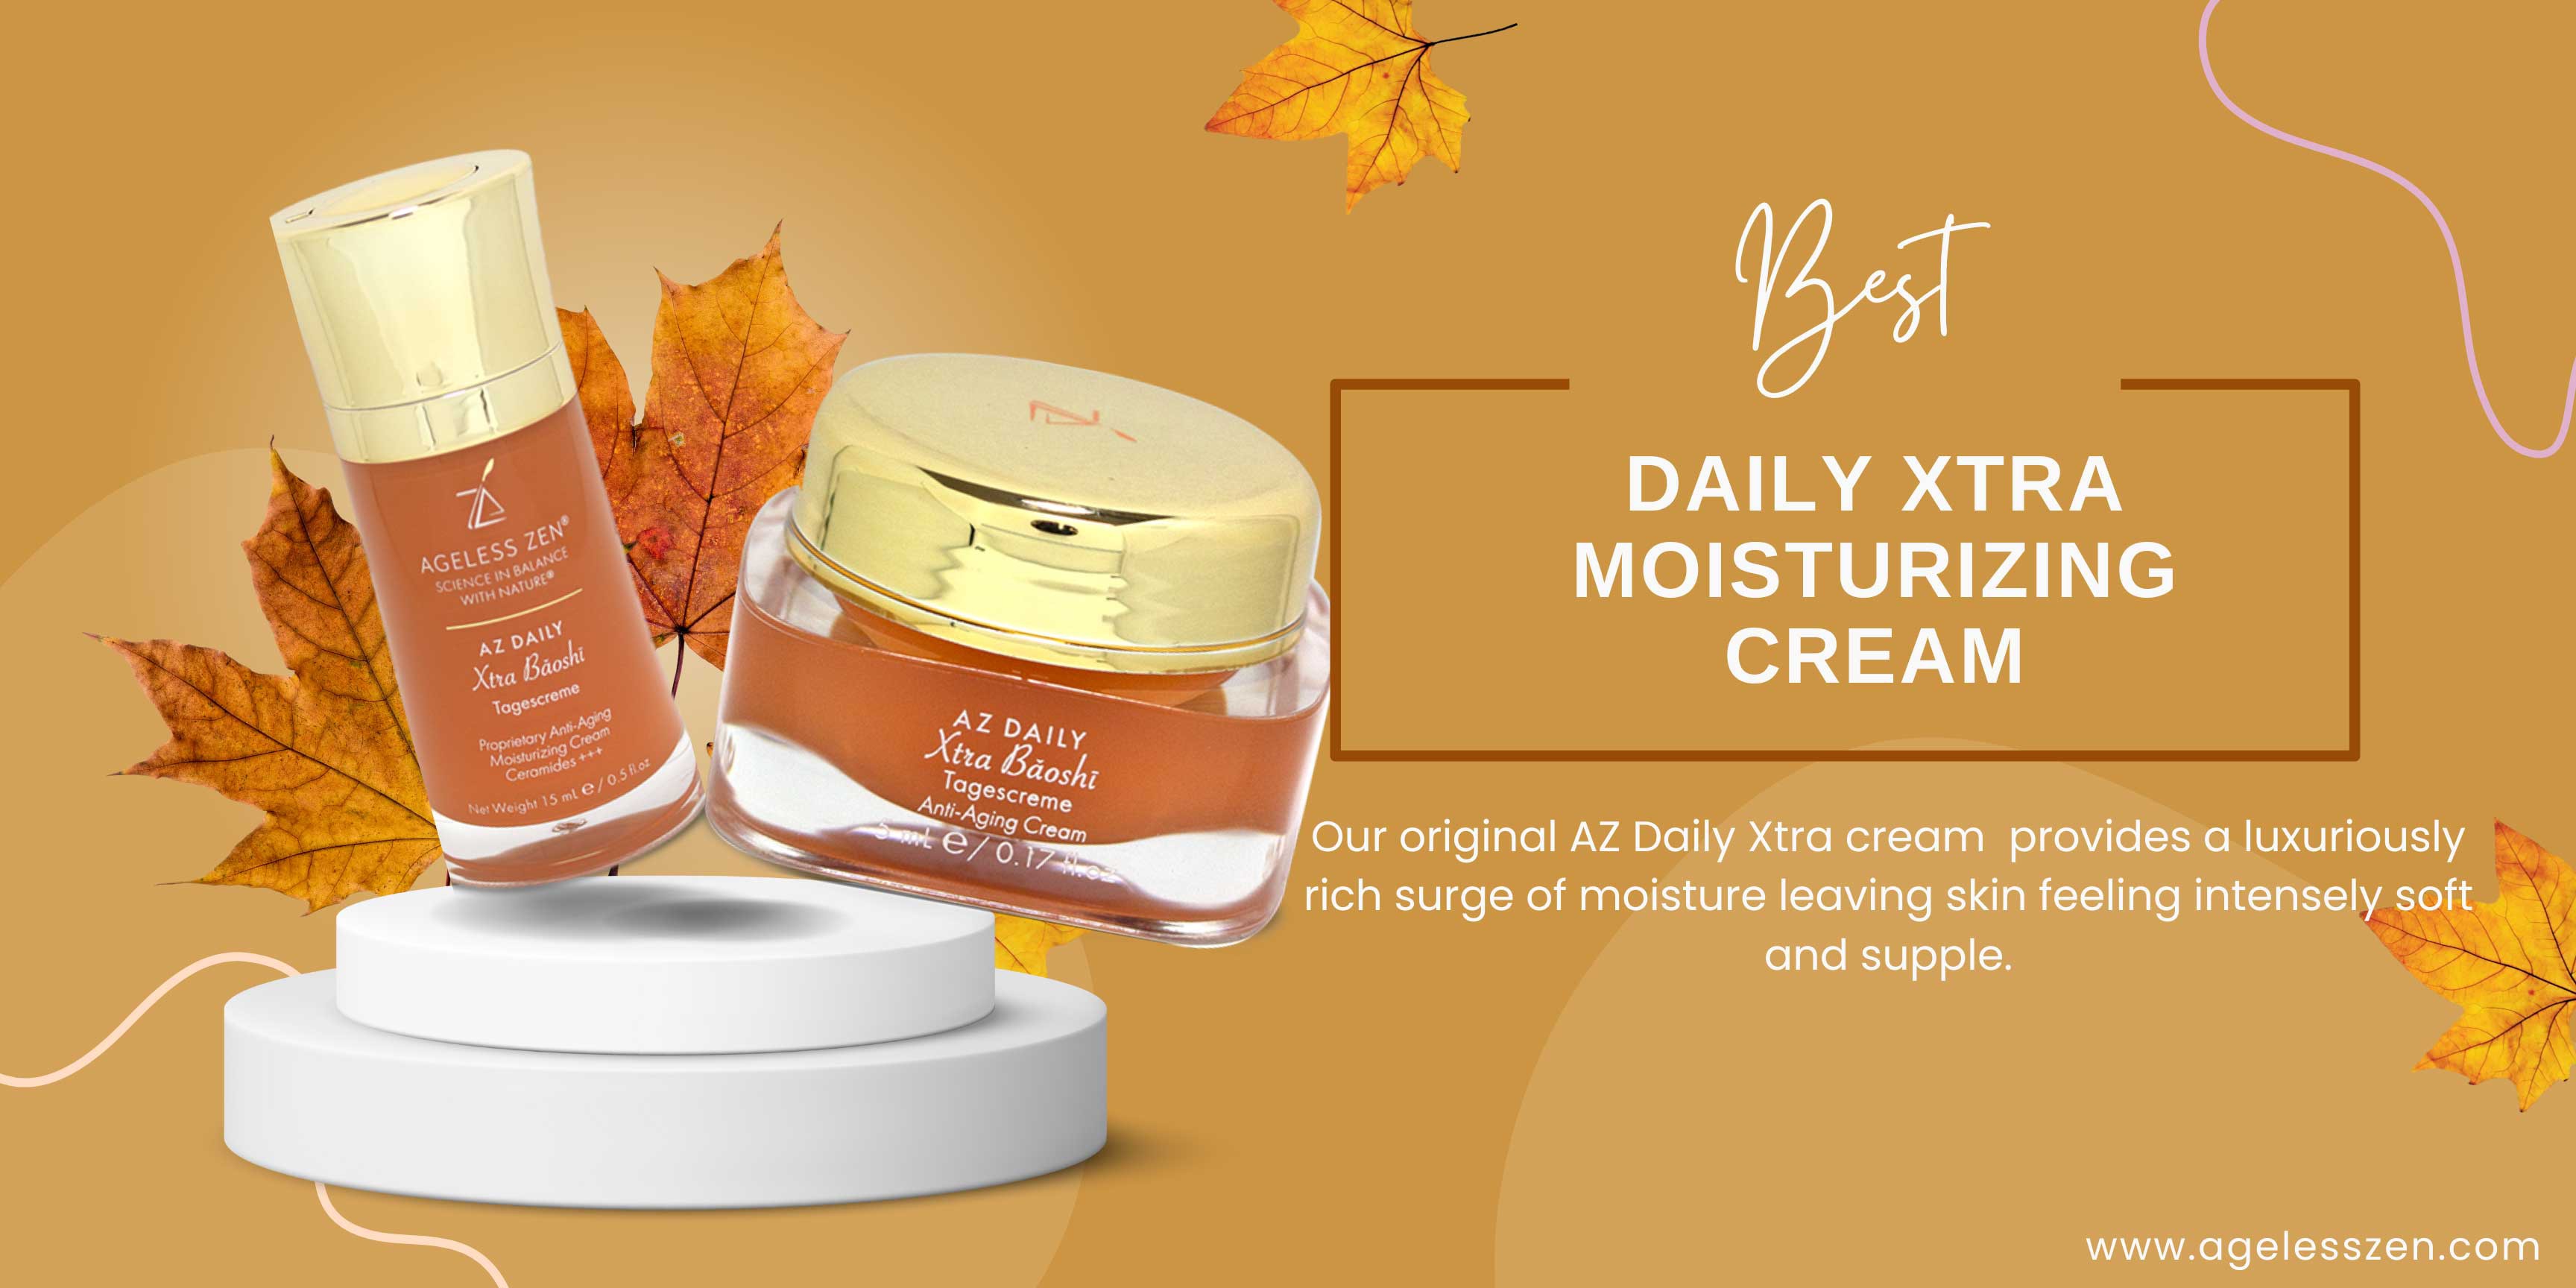 Get-Natural-Glow-with-DAILY-XTRA-MOISTURIZING-CREAM